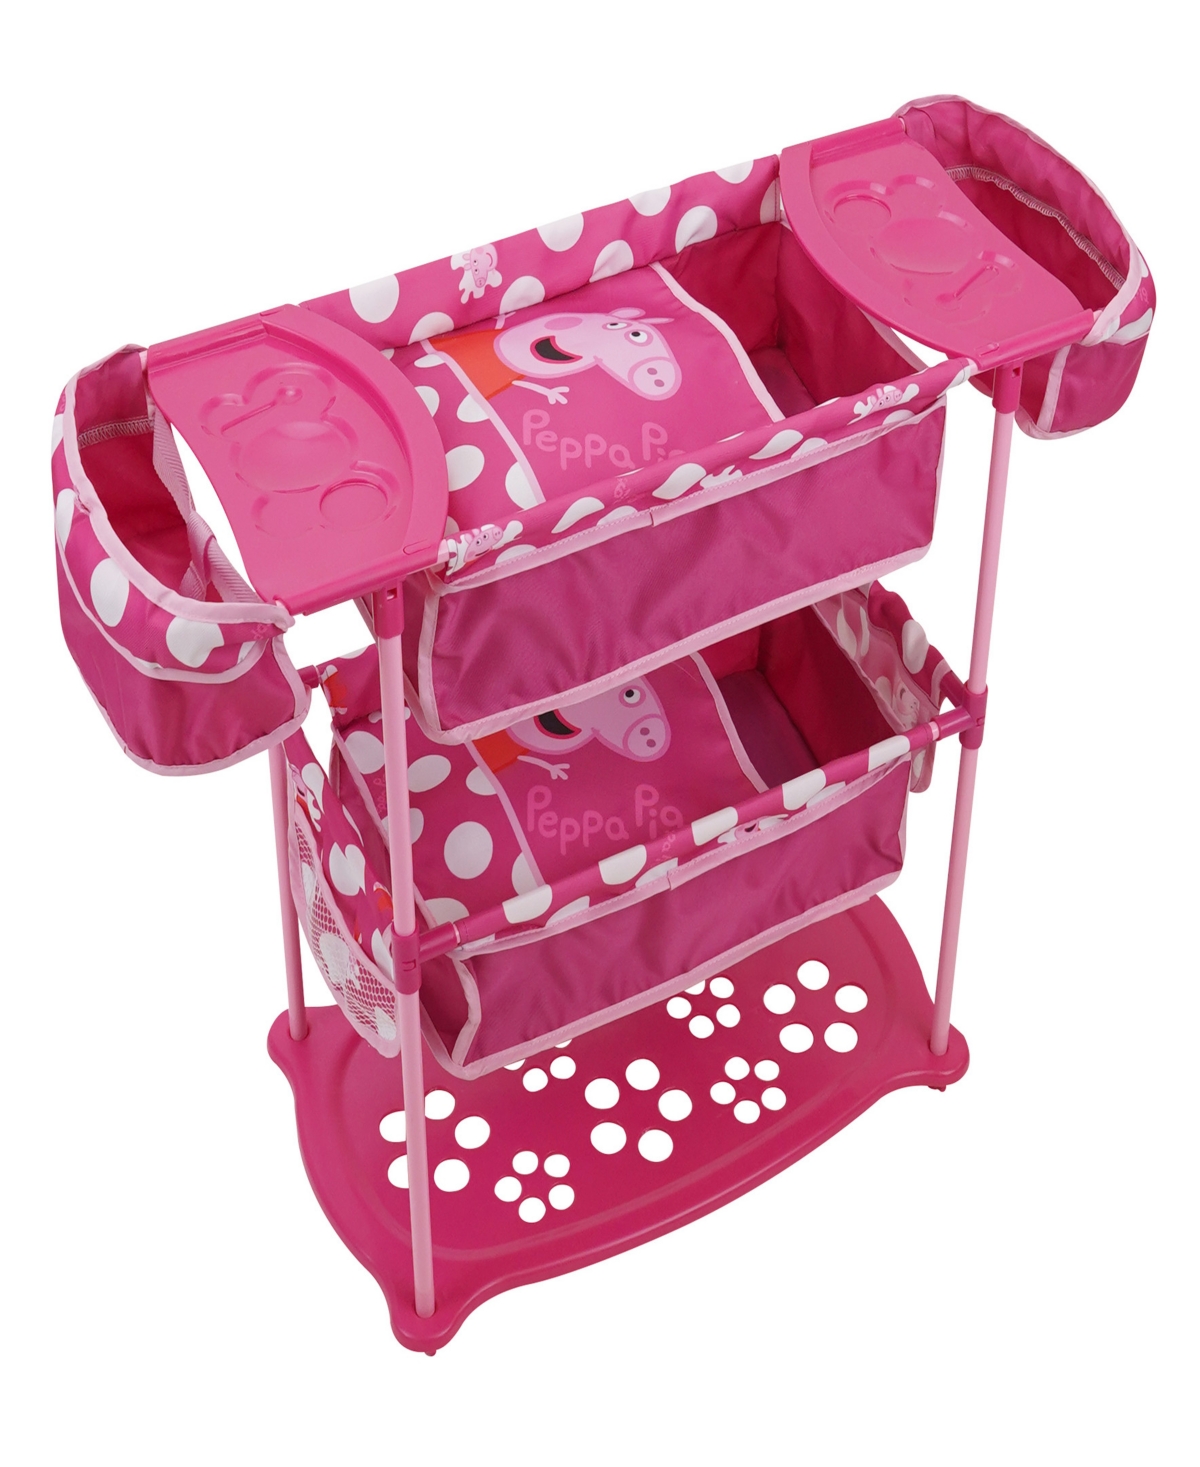 Peppa Pig Doll Twin Pink And White Dots Care Station In Multi